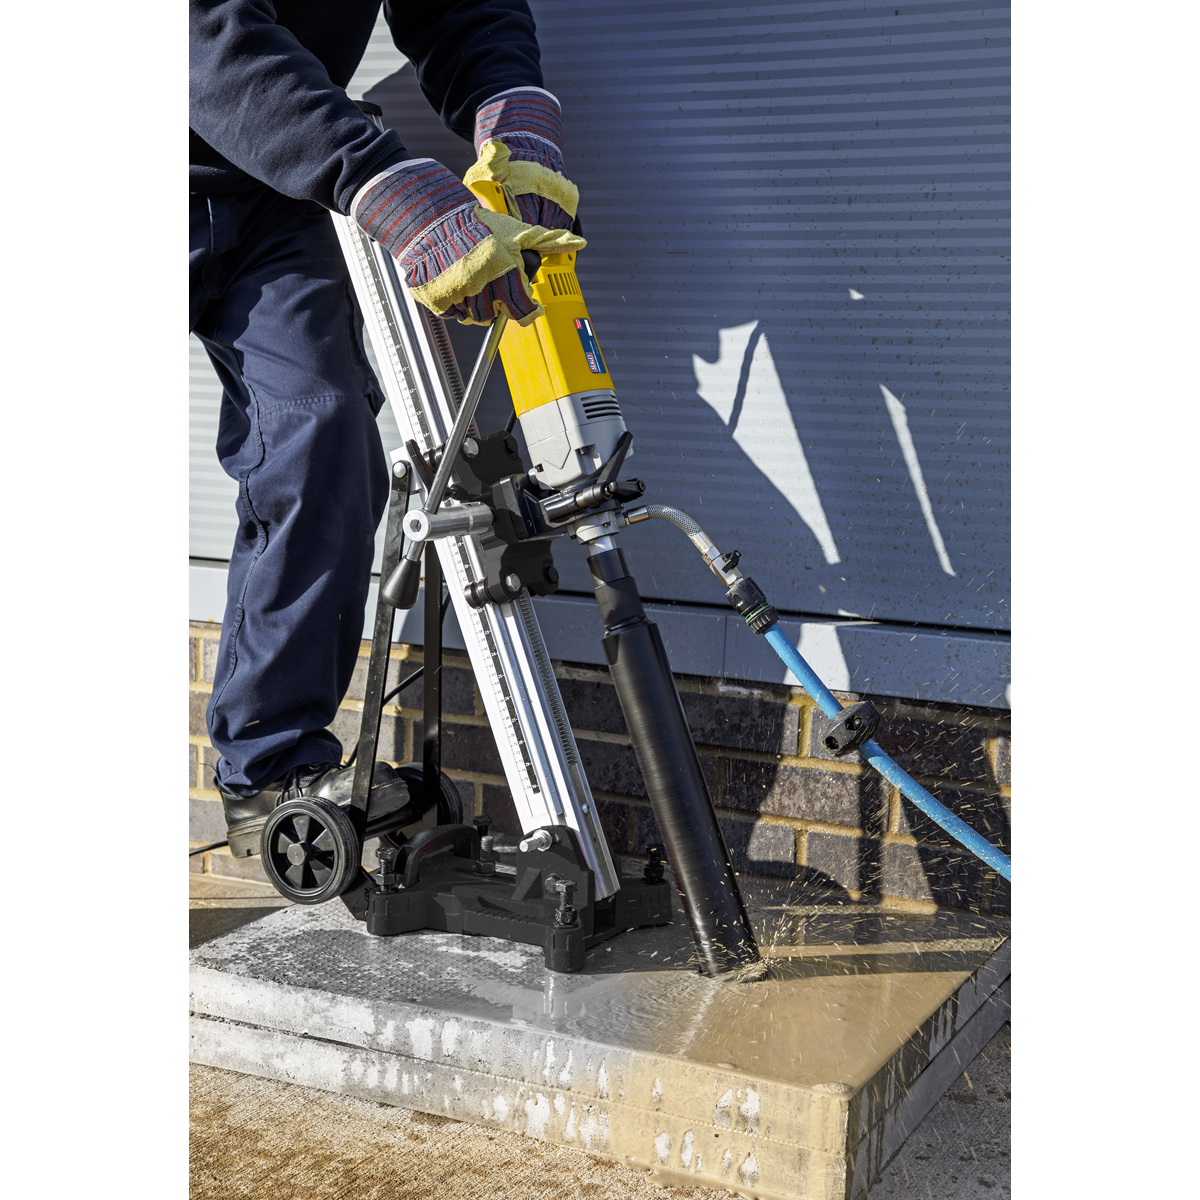 Sealey Diamond Core Drill Stand DCDST